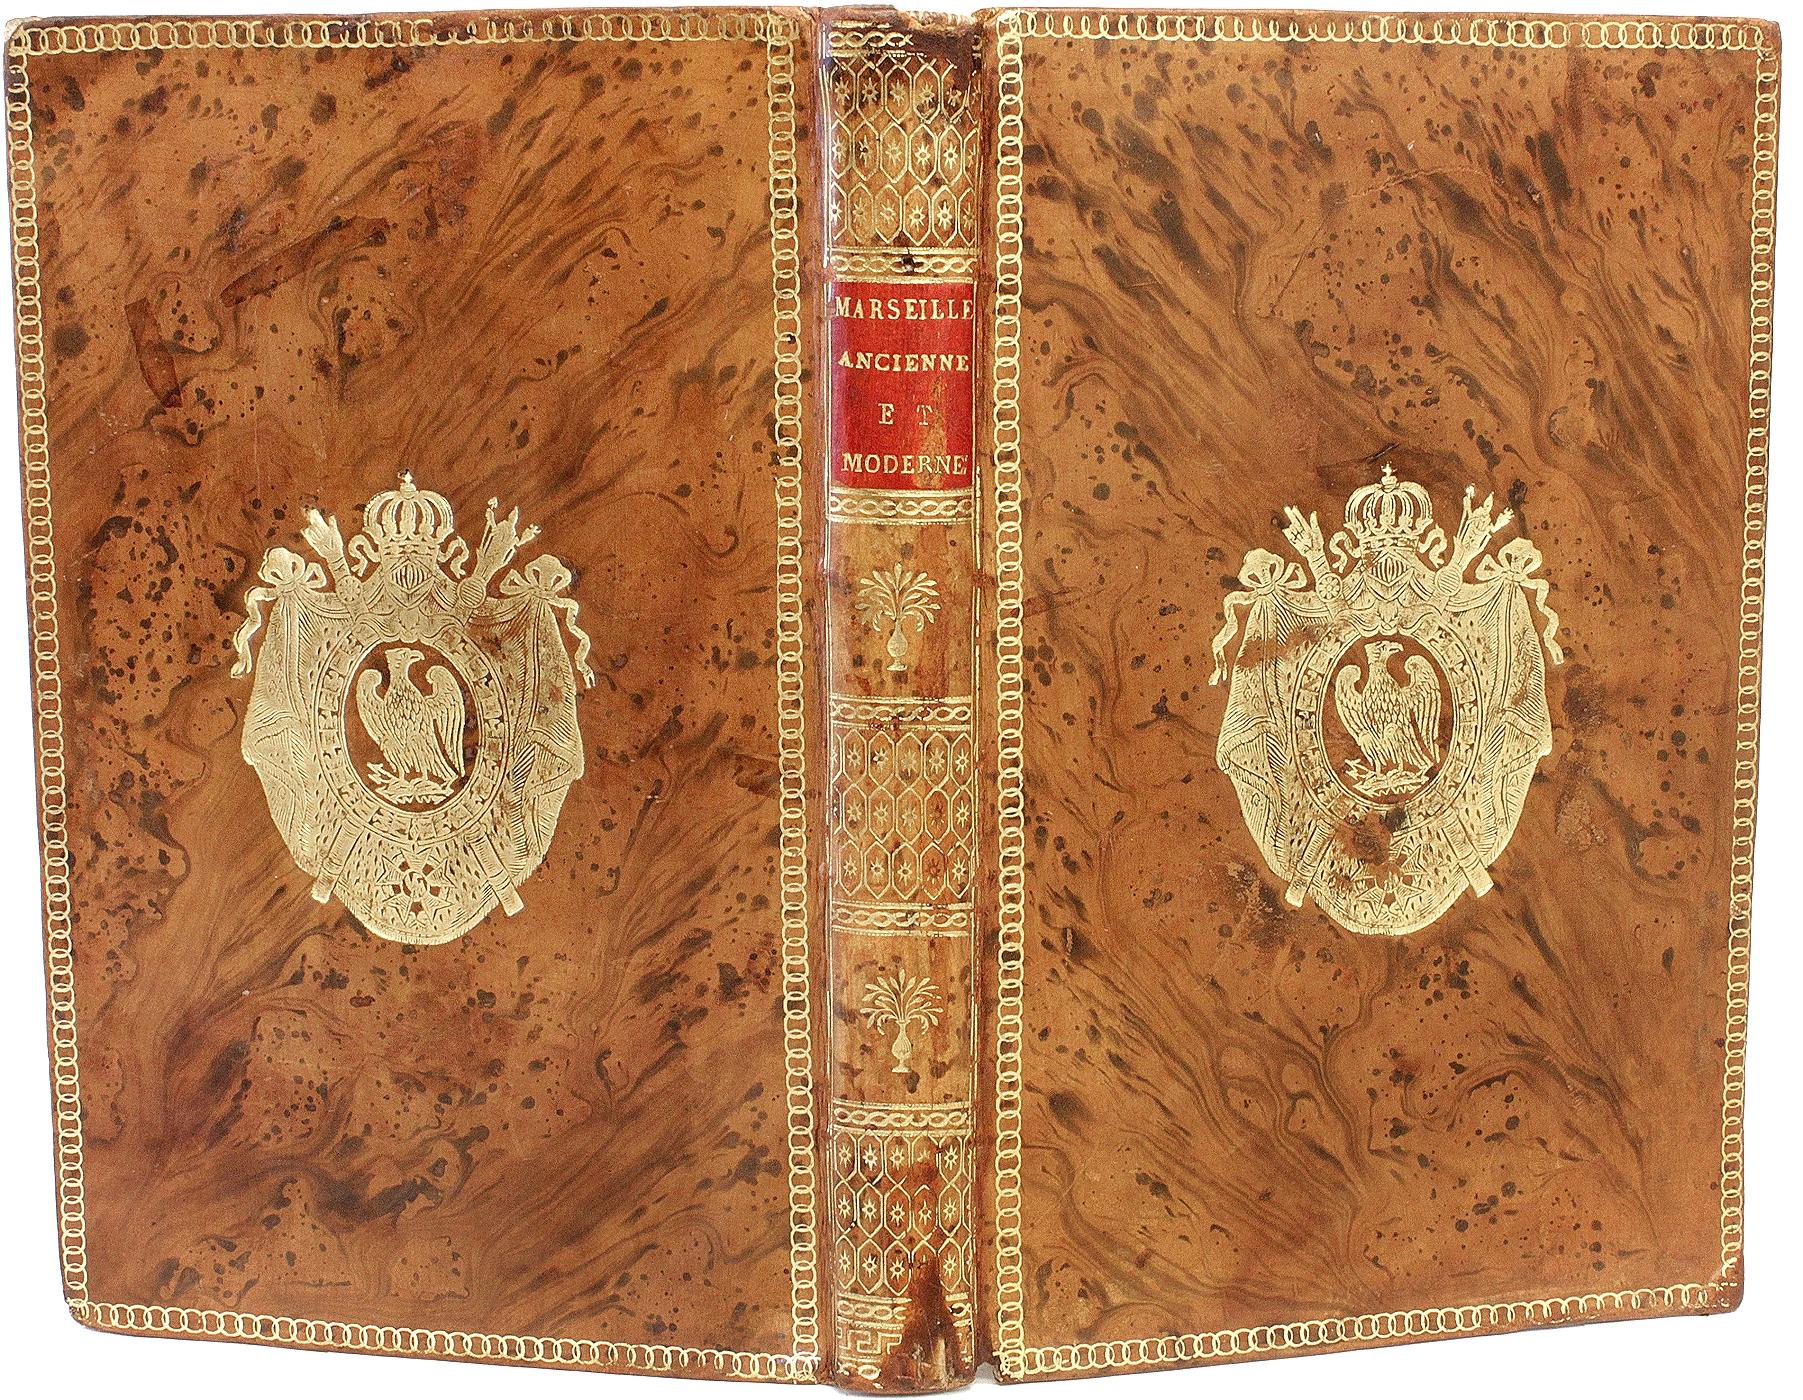 Late 18th Century Marseille Ancienne et Moderne - FIRST ED WITH THE GILT ARMS OF NAPOLEON - 1786 For Sale